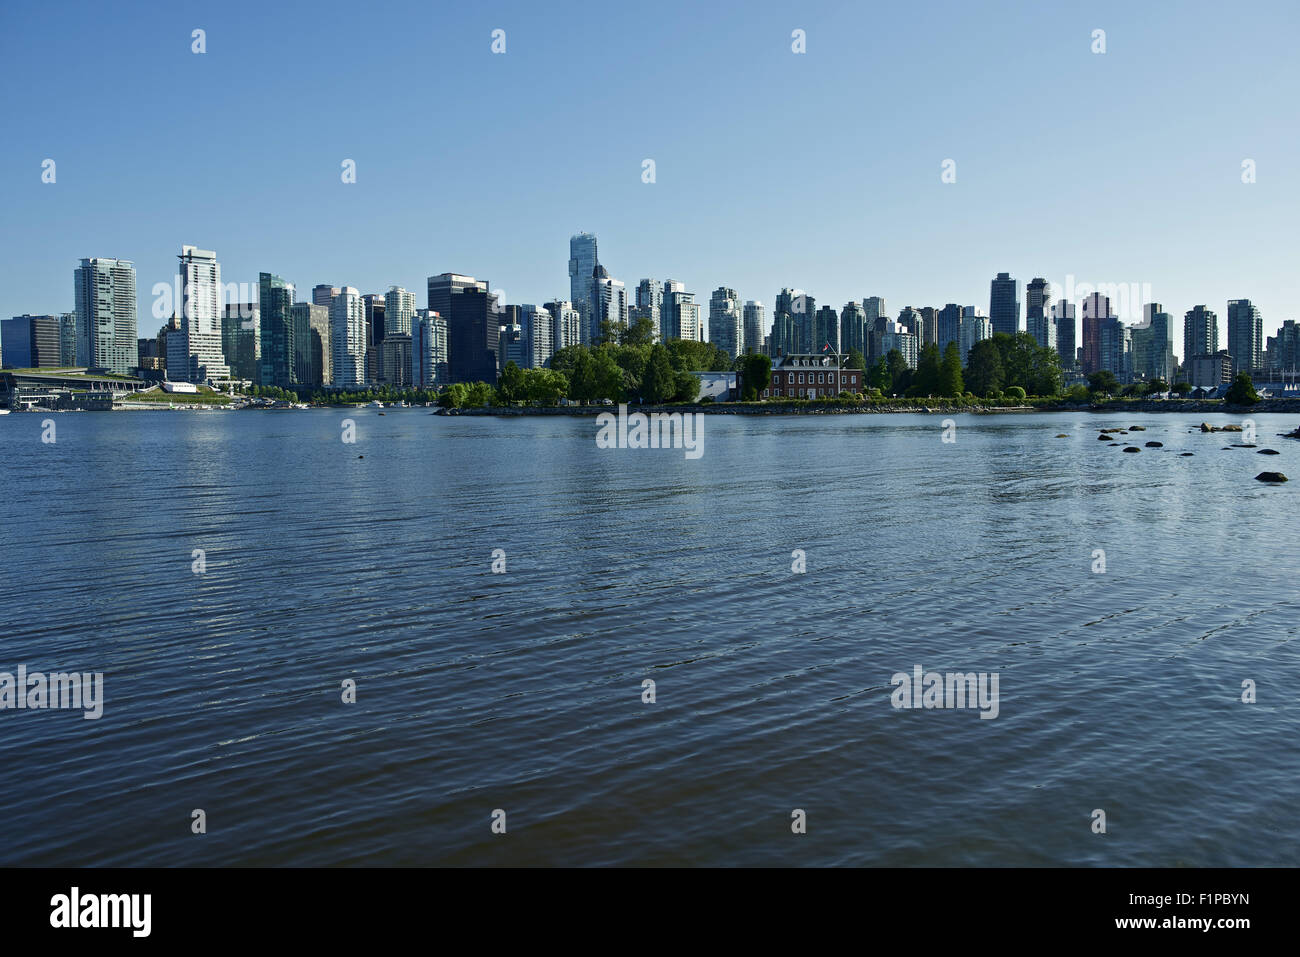 Vancouver, BC Skyline - Vancouver Downtown in Summer. Canada Photo Collection Stock Photo